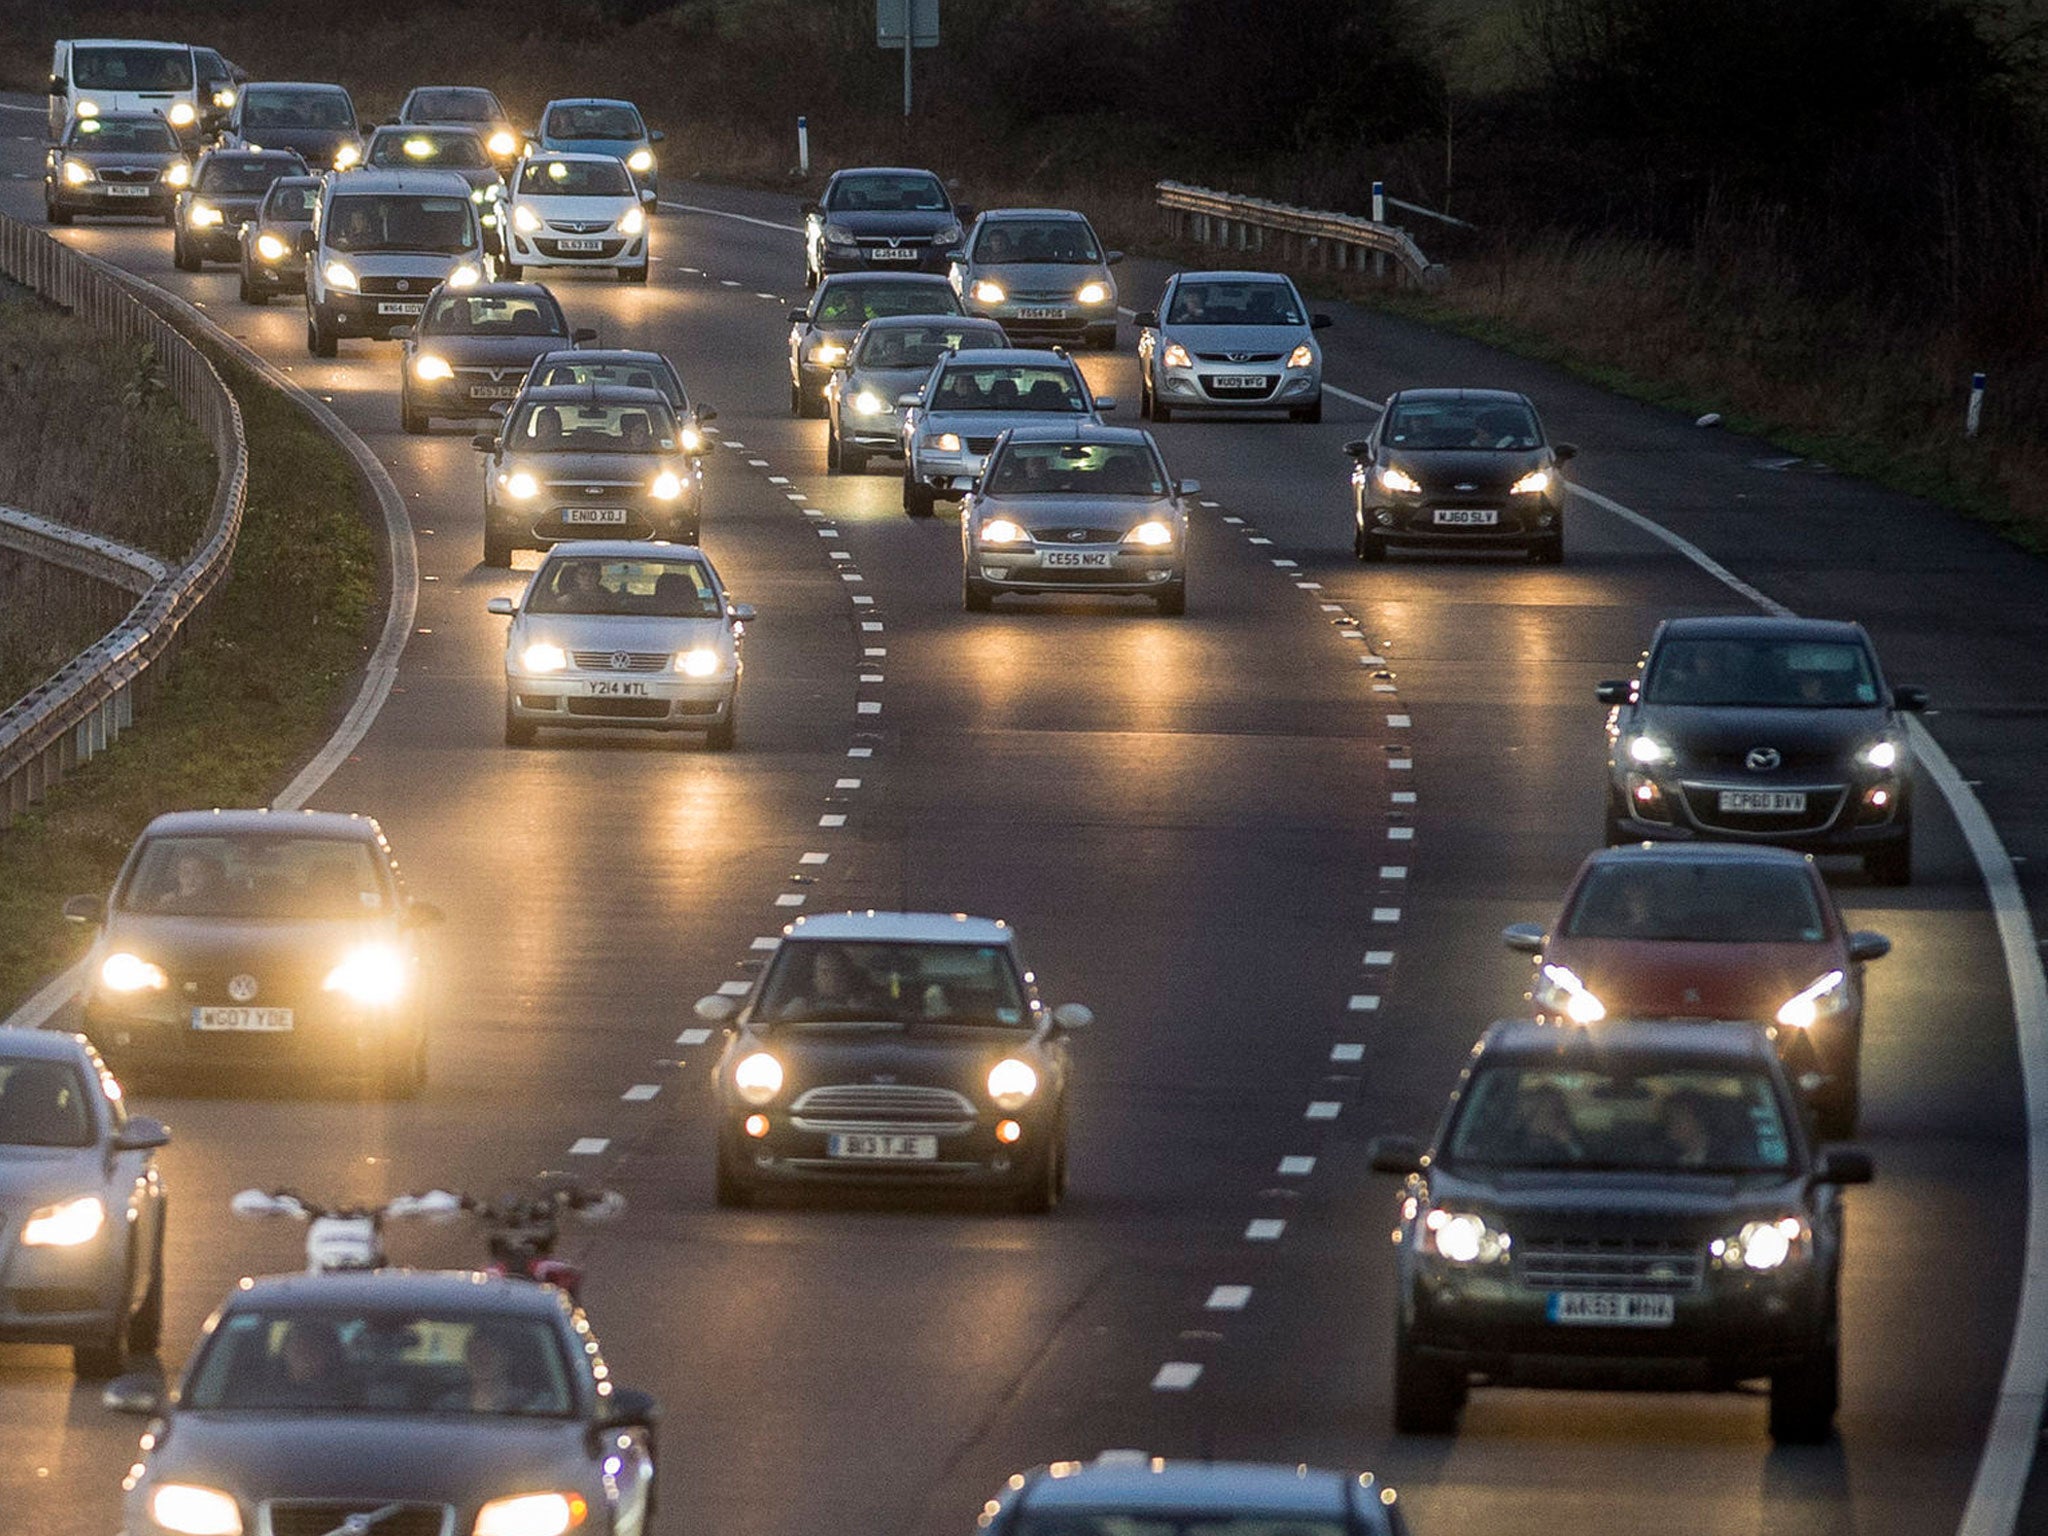 As you drive home for Christmas, imagine how much more enjoyable a journey could be with fewer cars on the road